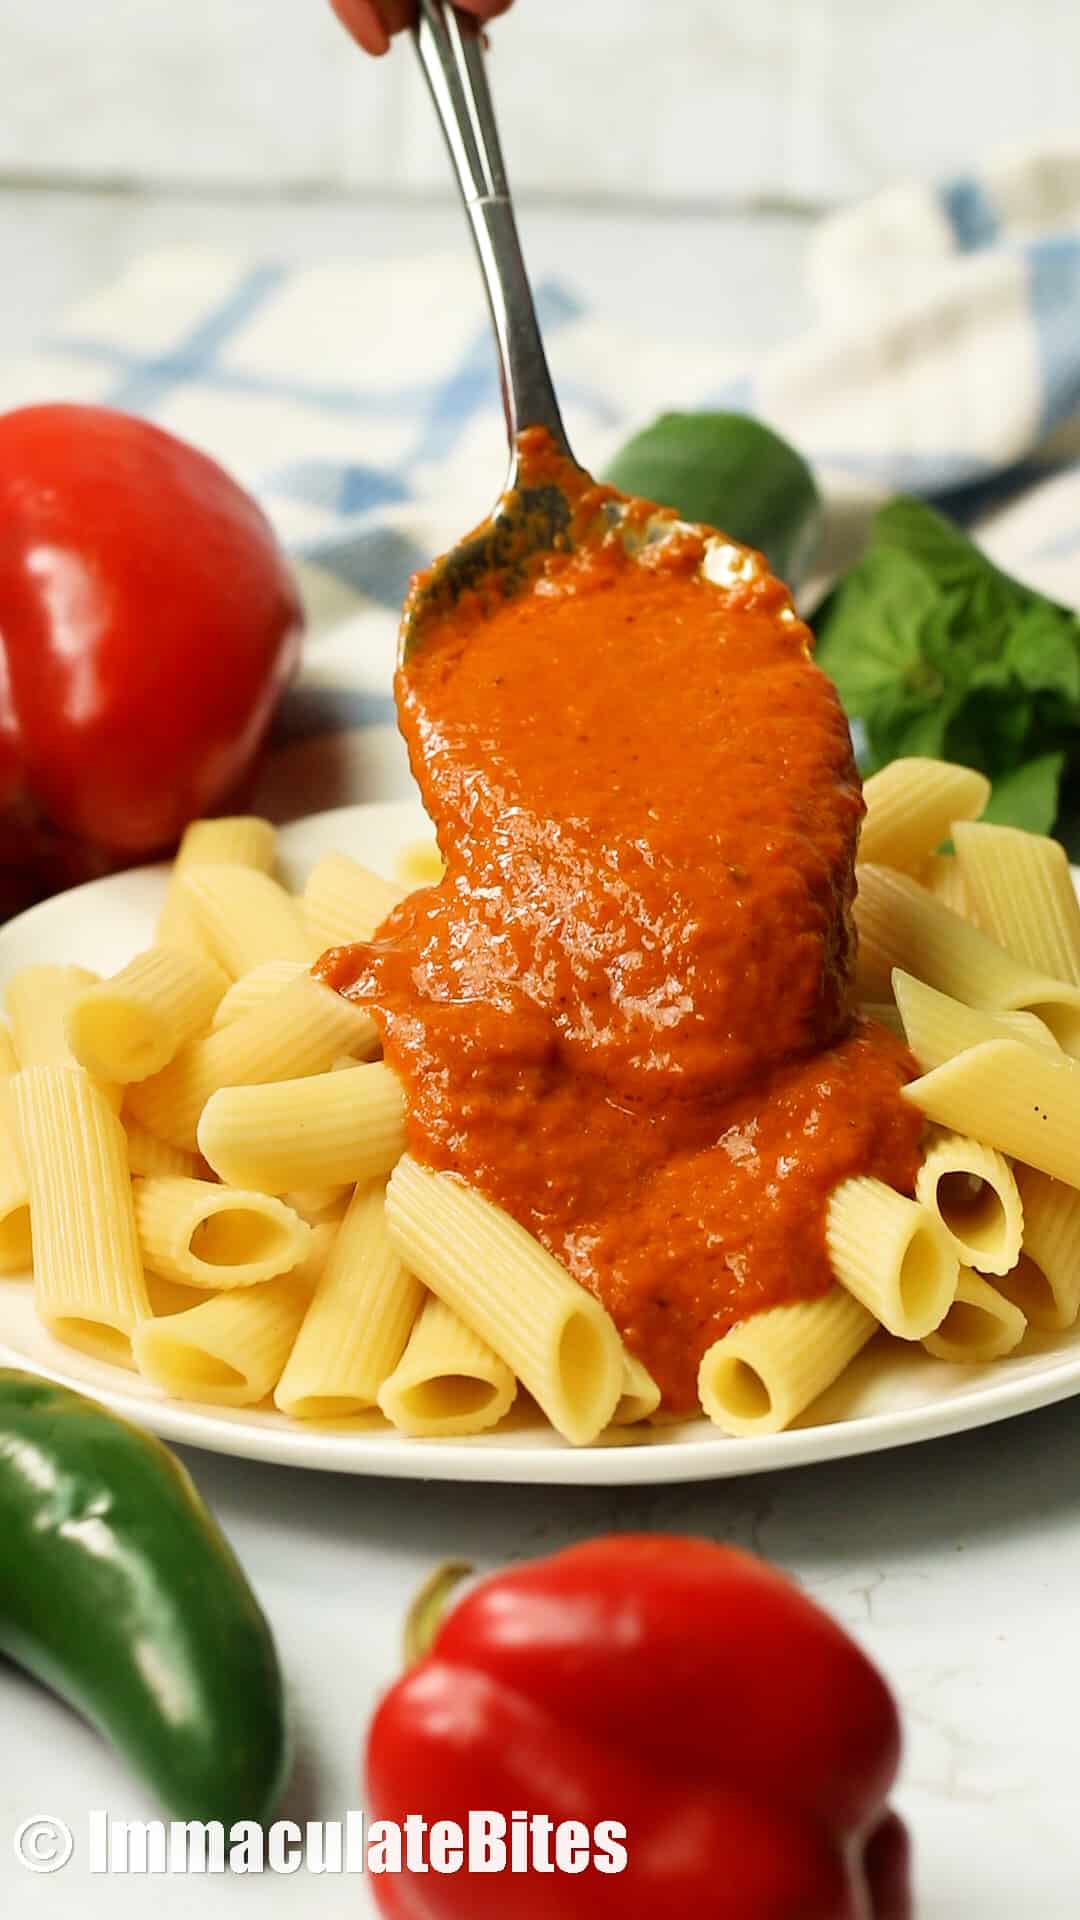 Roasted red pepper sauce over pasta with red pepper and jalapeno background